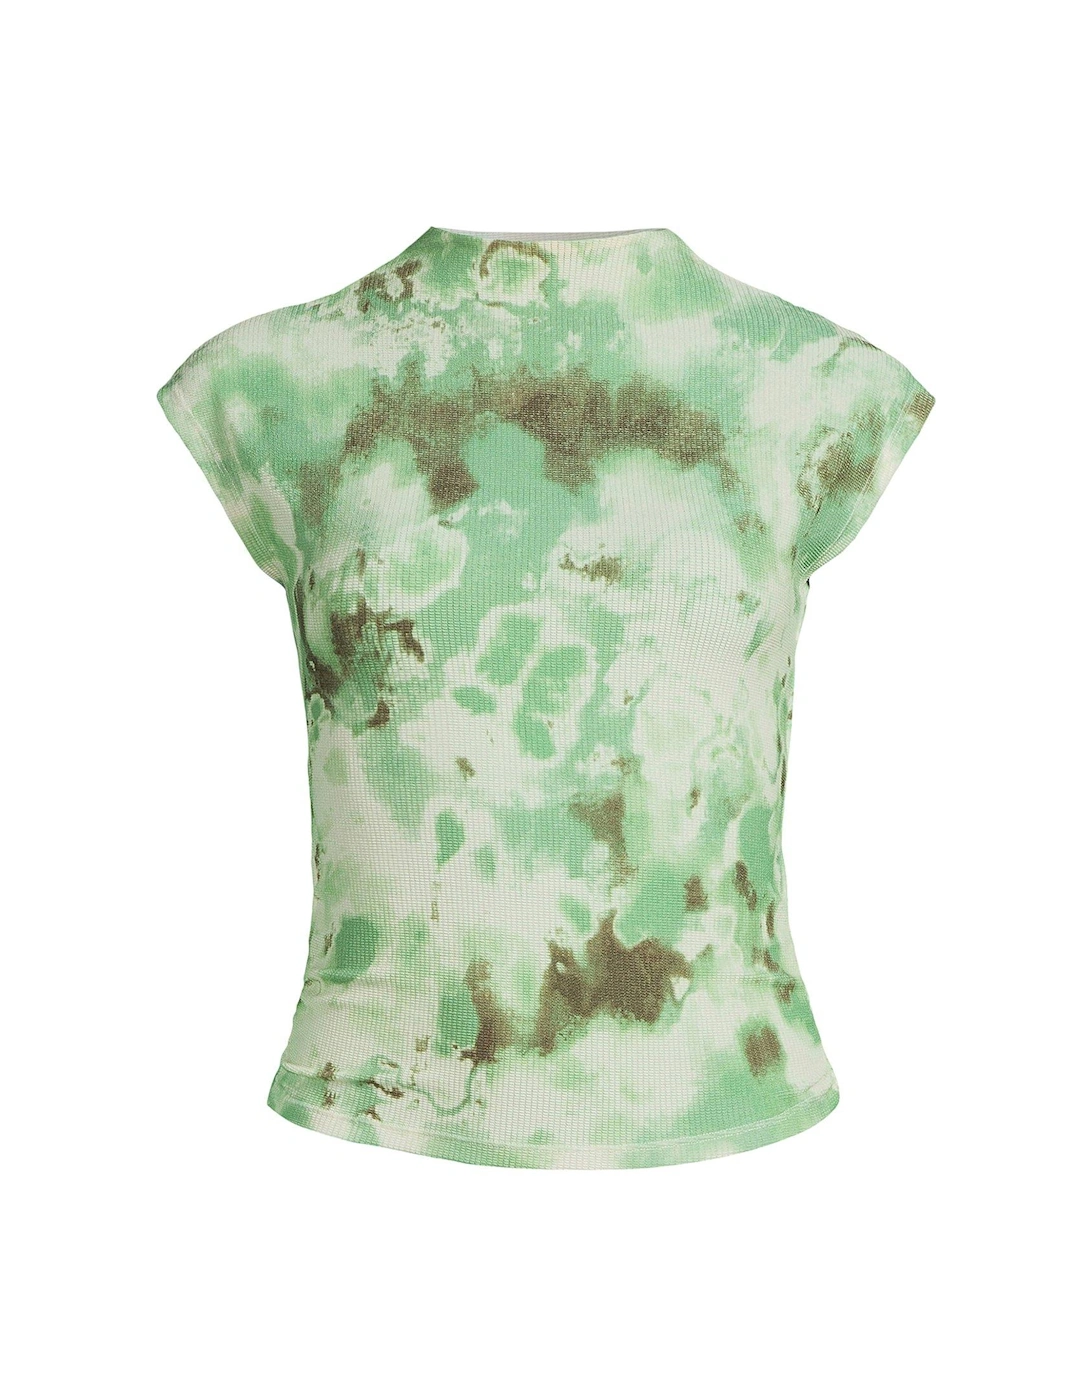 Textured Jersey Printed Knitted Top - Green Floral